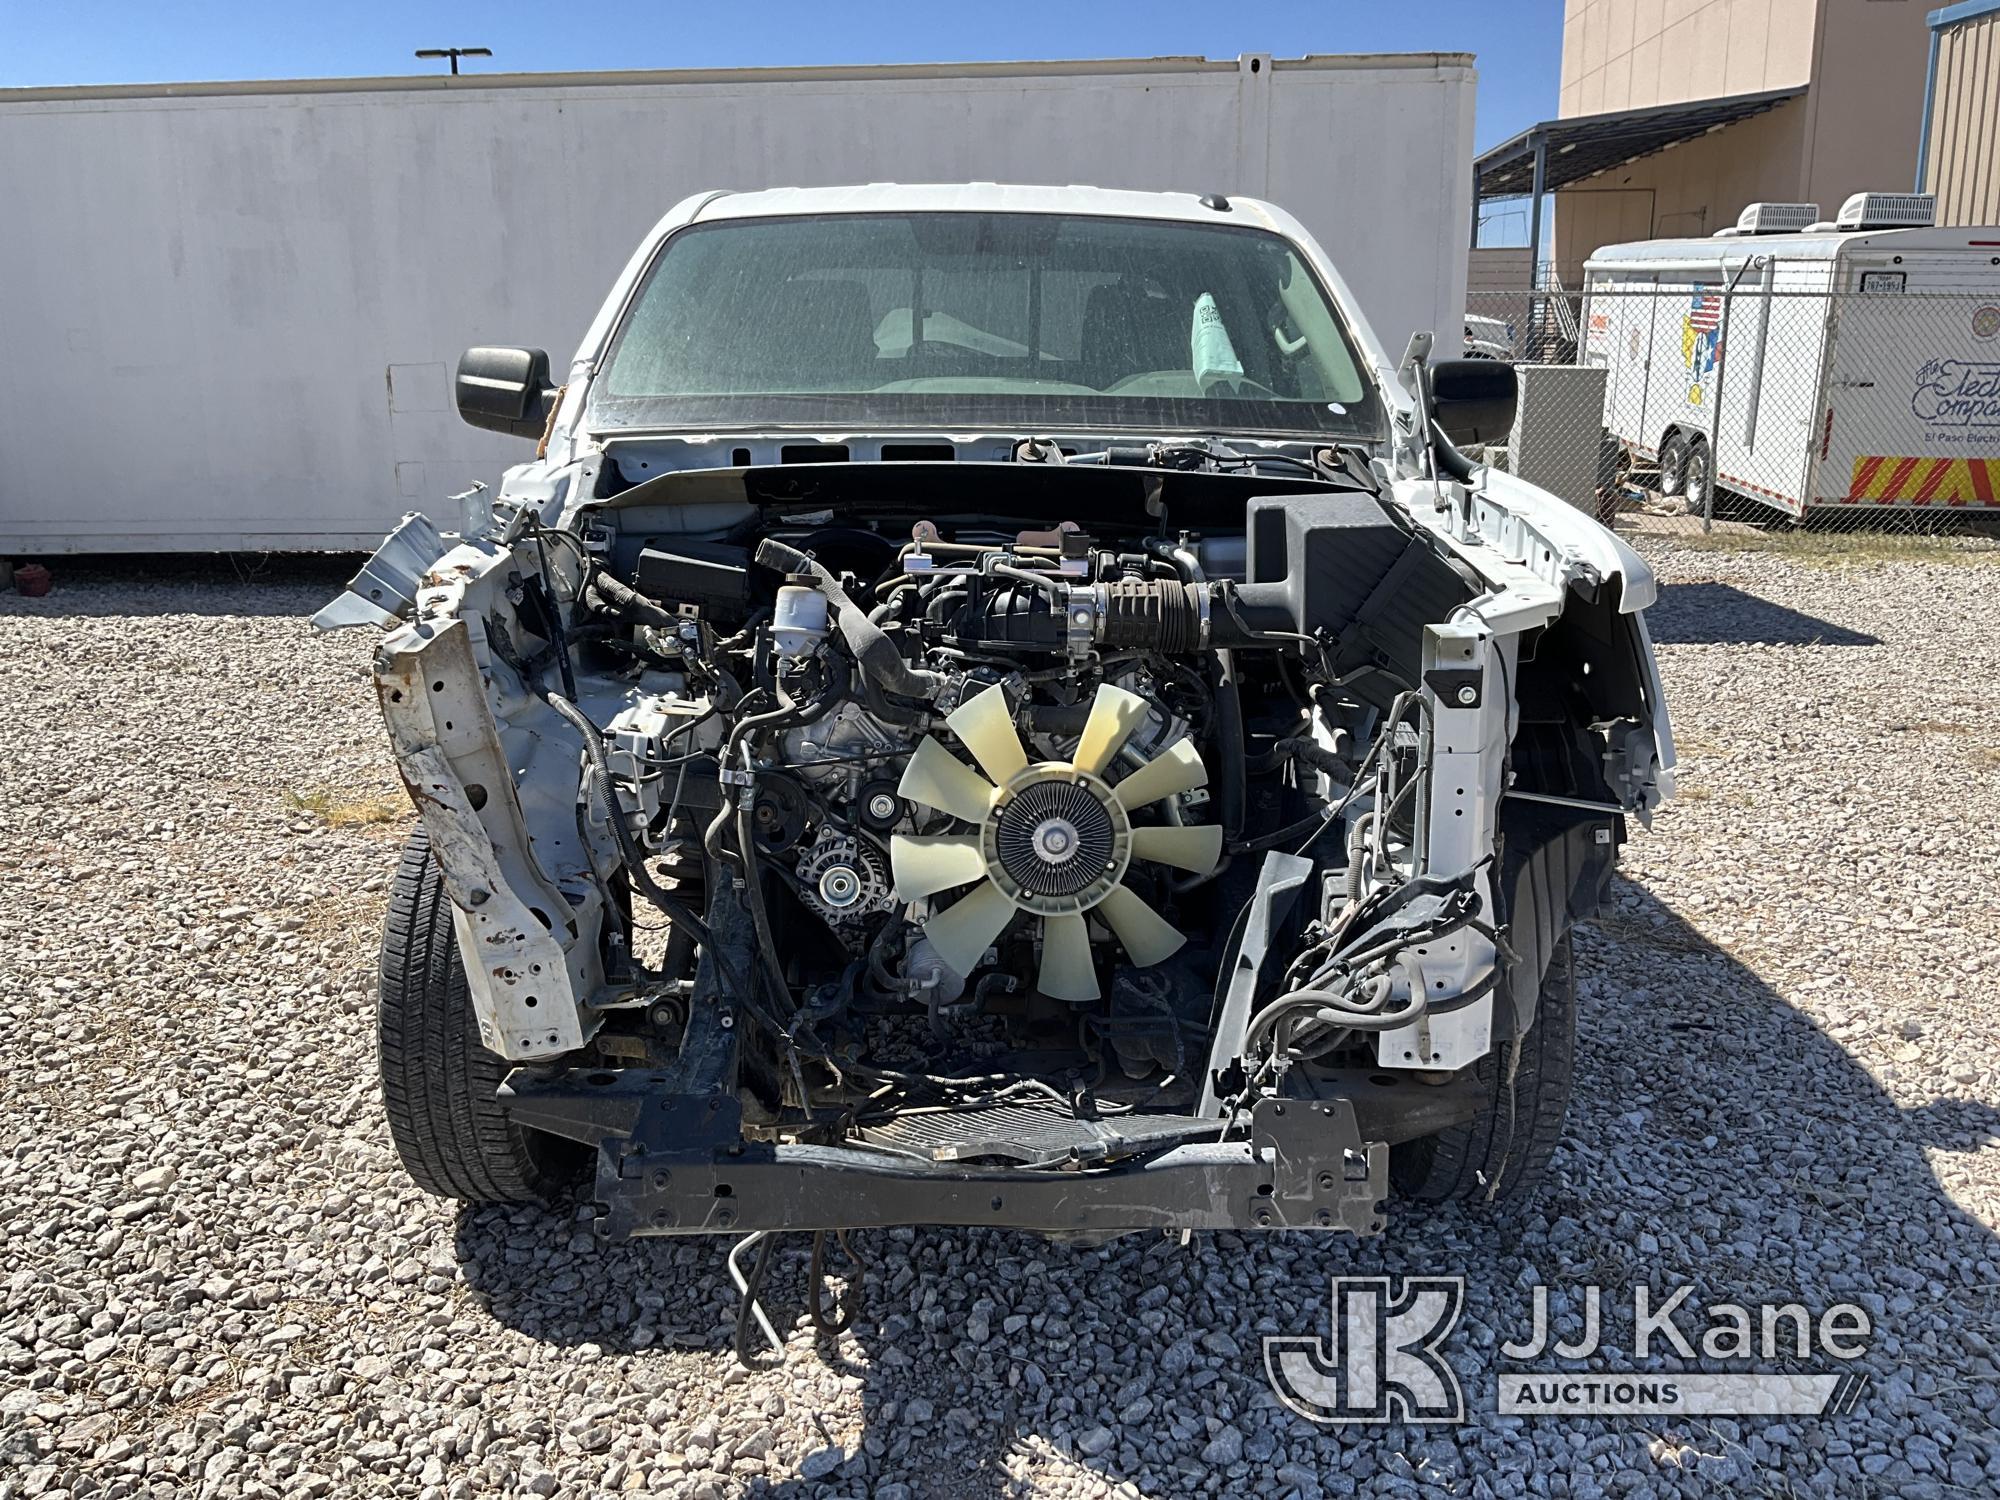 (El Paso, TX) 2019 Nissan Titan XD 4x4 Crew-Cab Pickup Truck Wrecked, Not Running Or Moving, Parts I